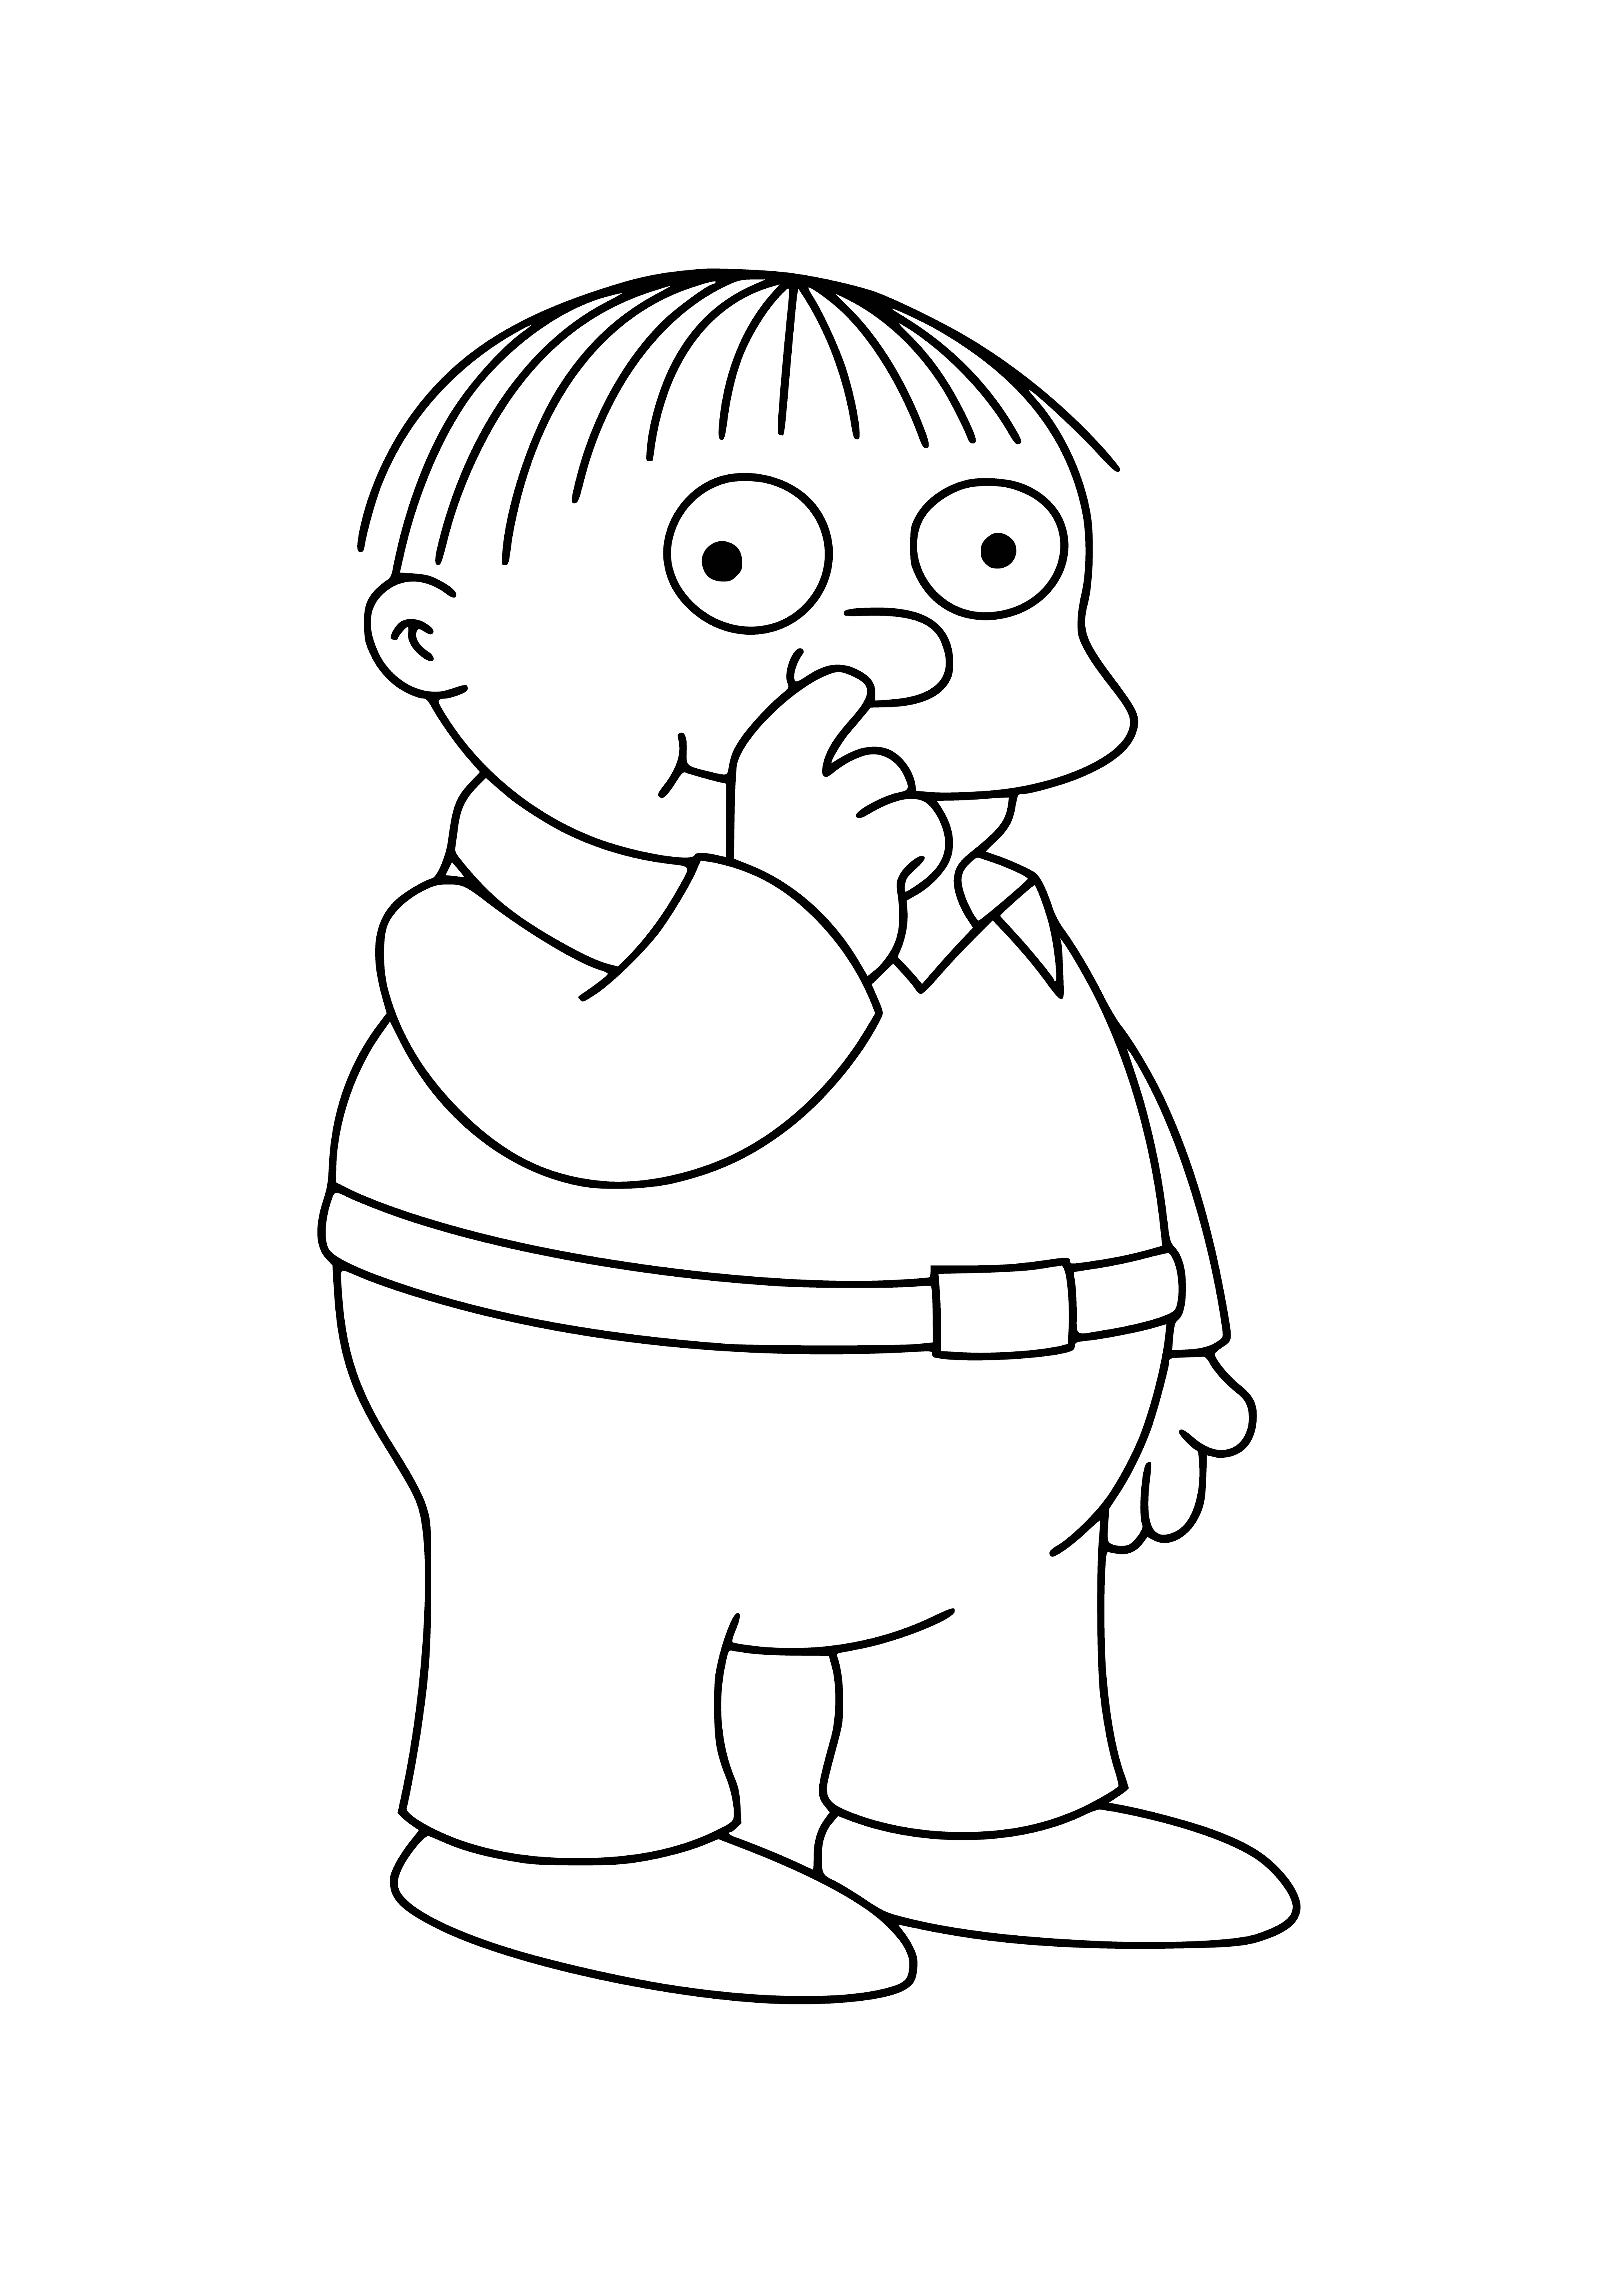 Sheriff's son Ralph Wiggum coloring page